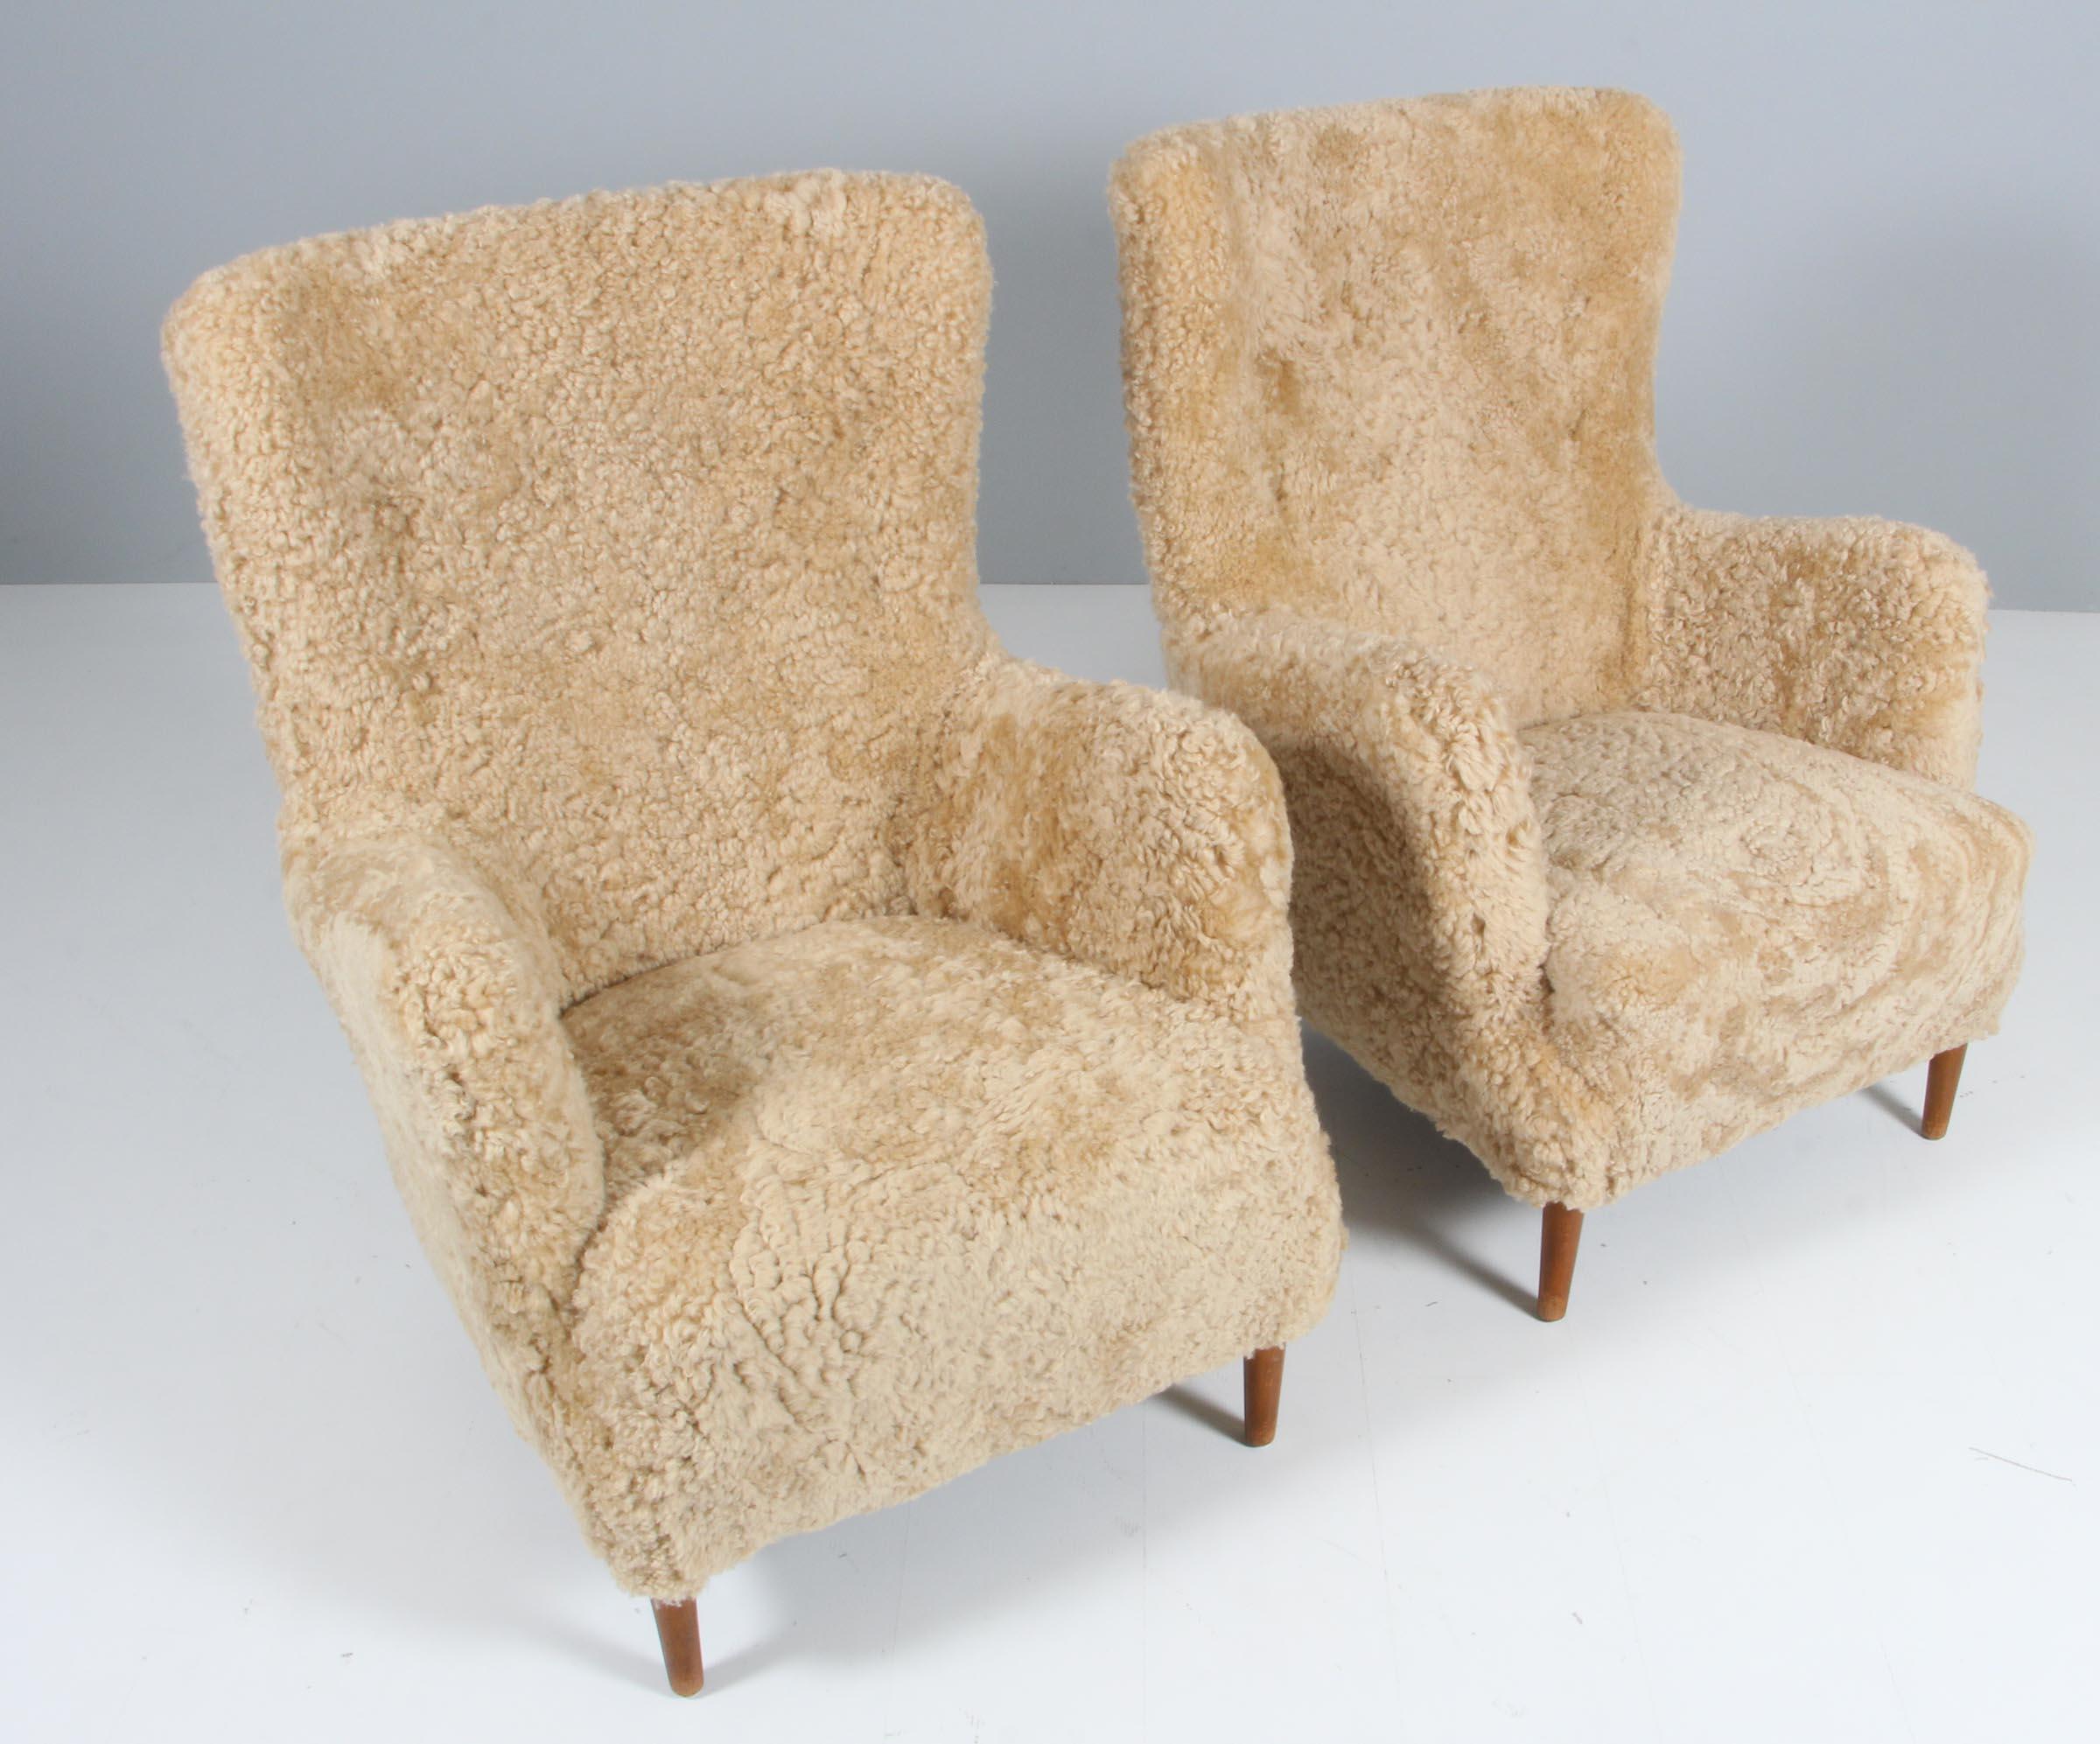 Pair of lounge chairs from the 1940s new upholstered with lambskin.

Legs of stained beech